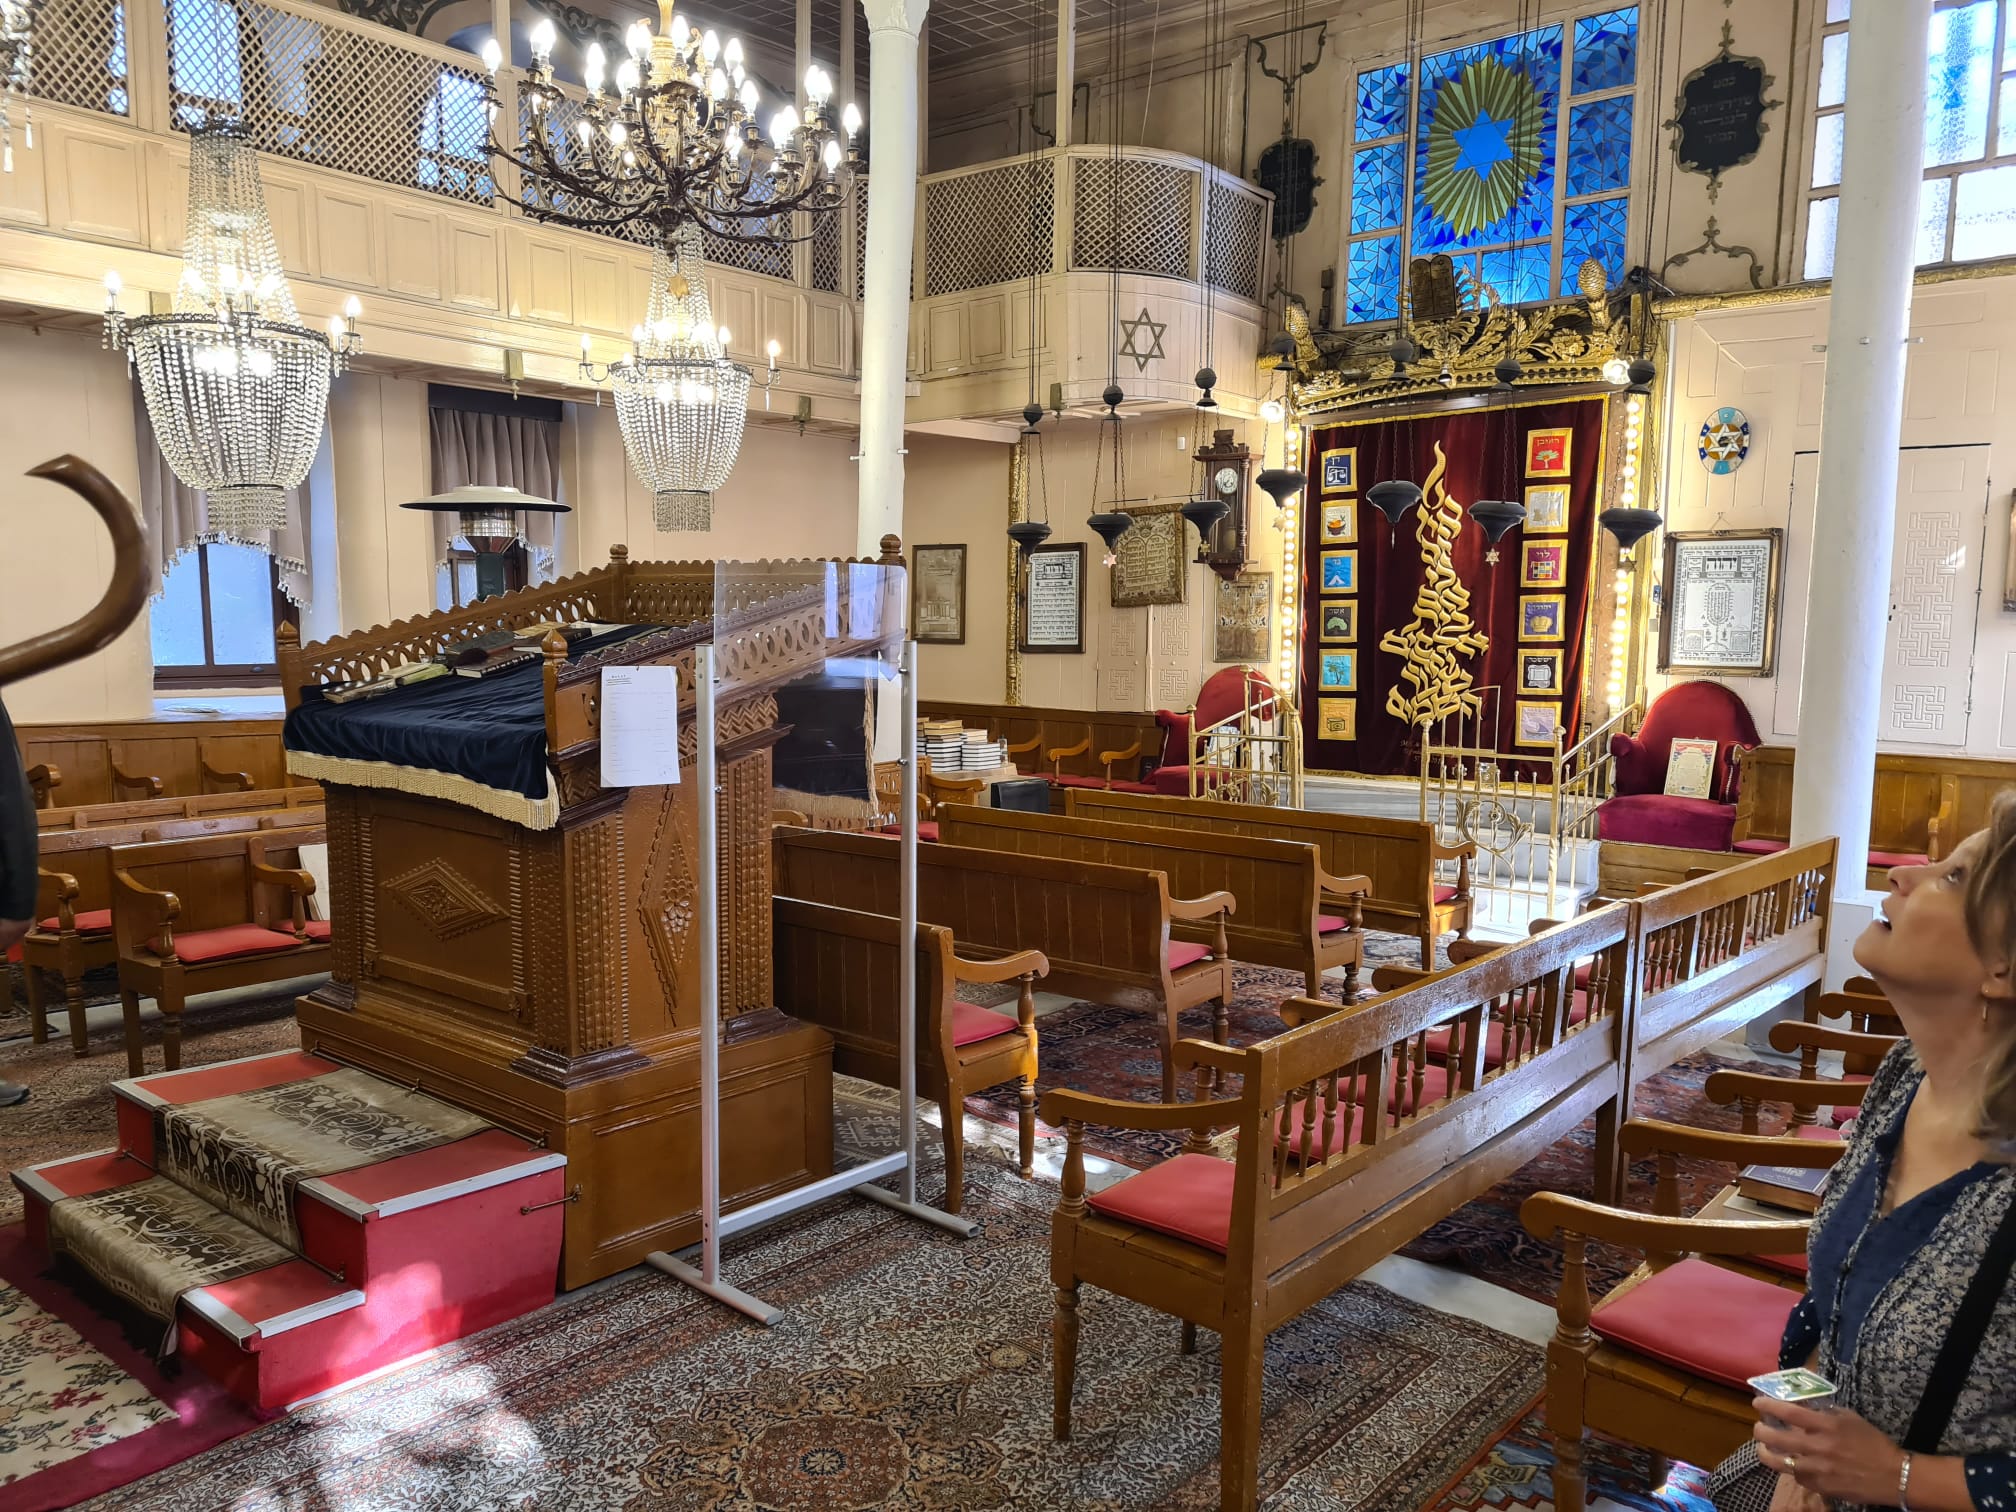 The Jewish Community and Notable Synagogues in Istanbul